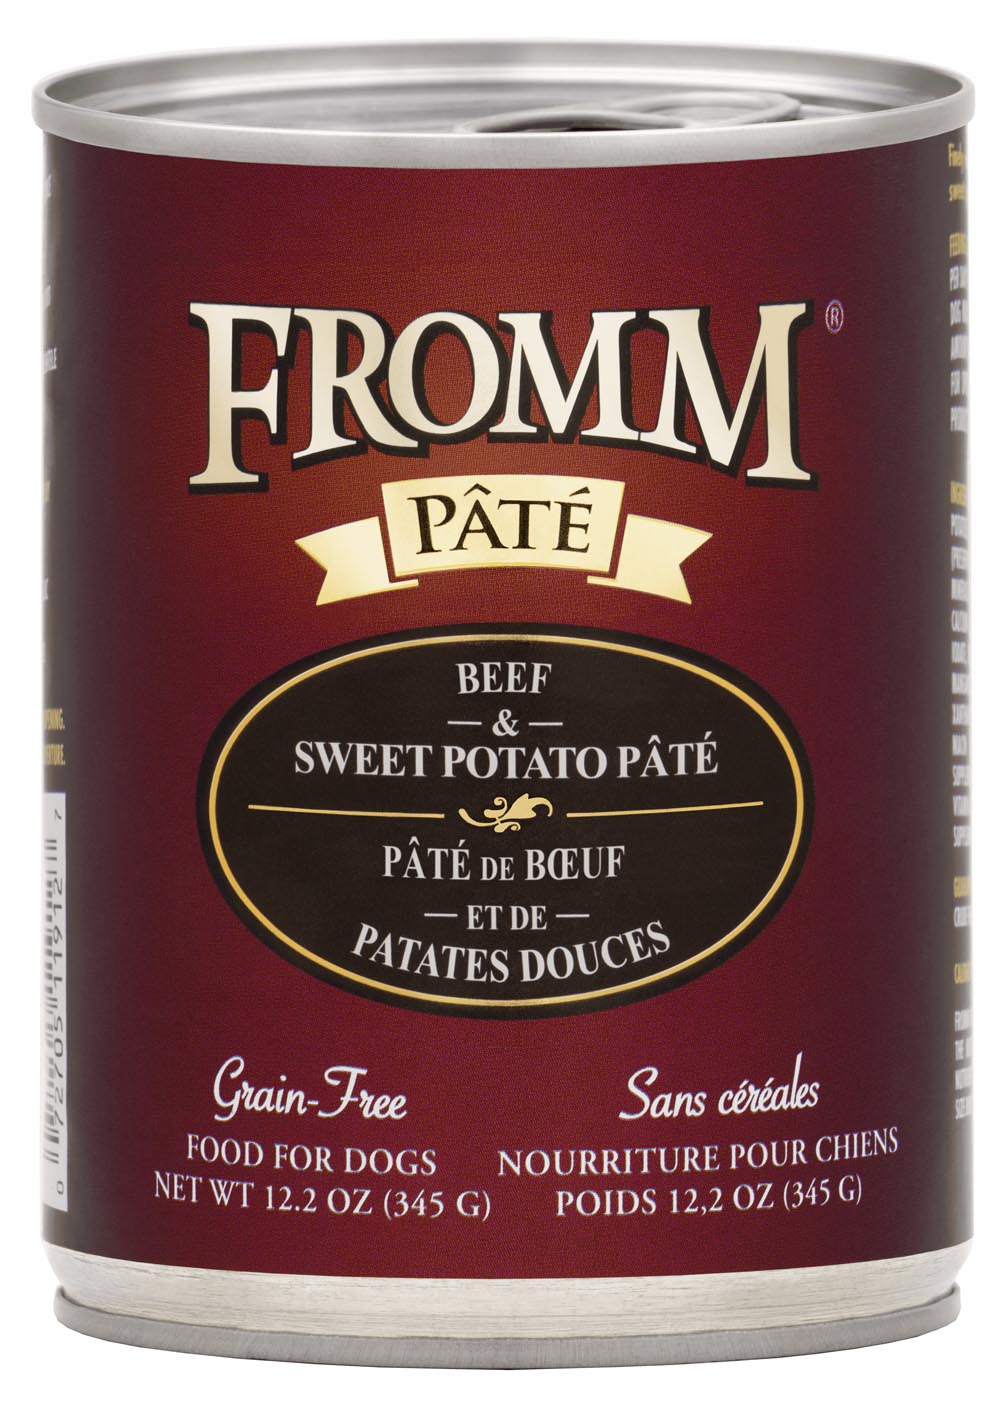 Fromm Beef & Sweet Potato Pate Food for Dogs, 12.2 oz